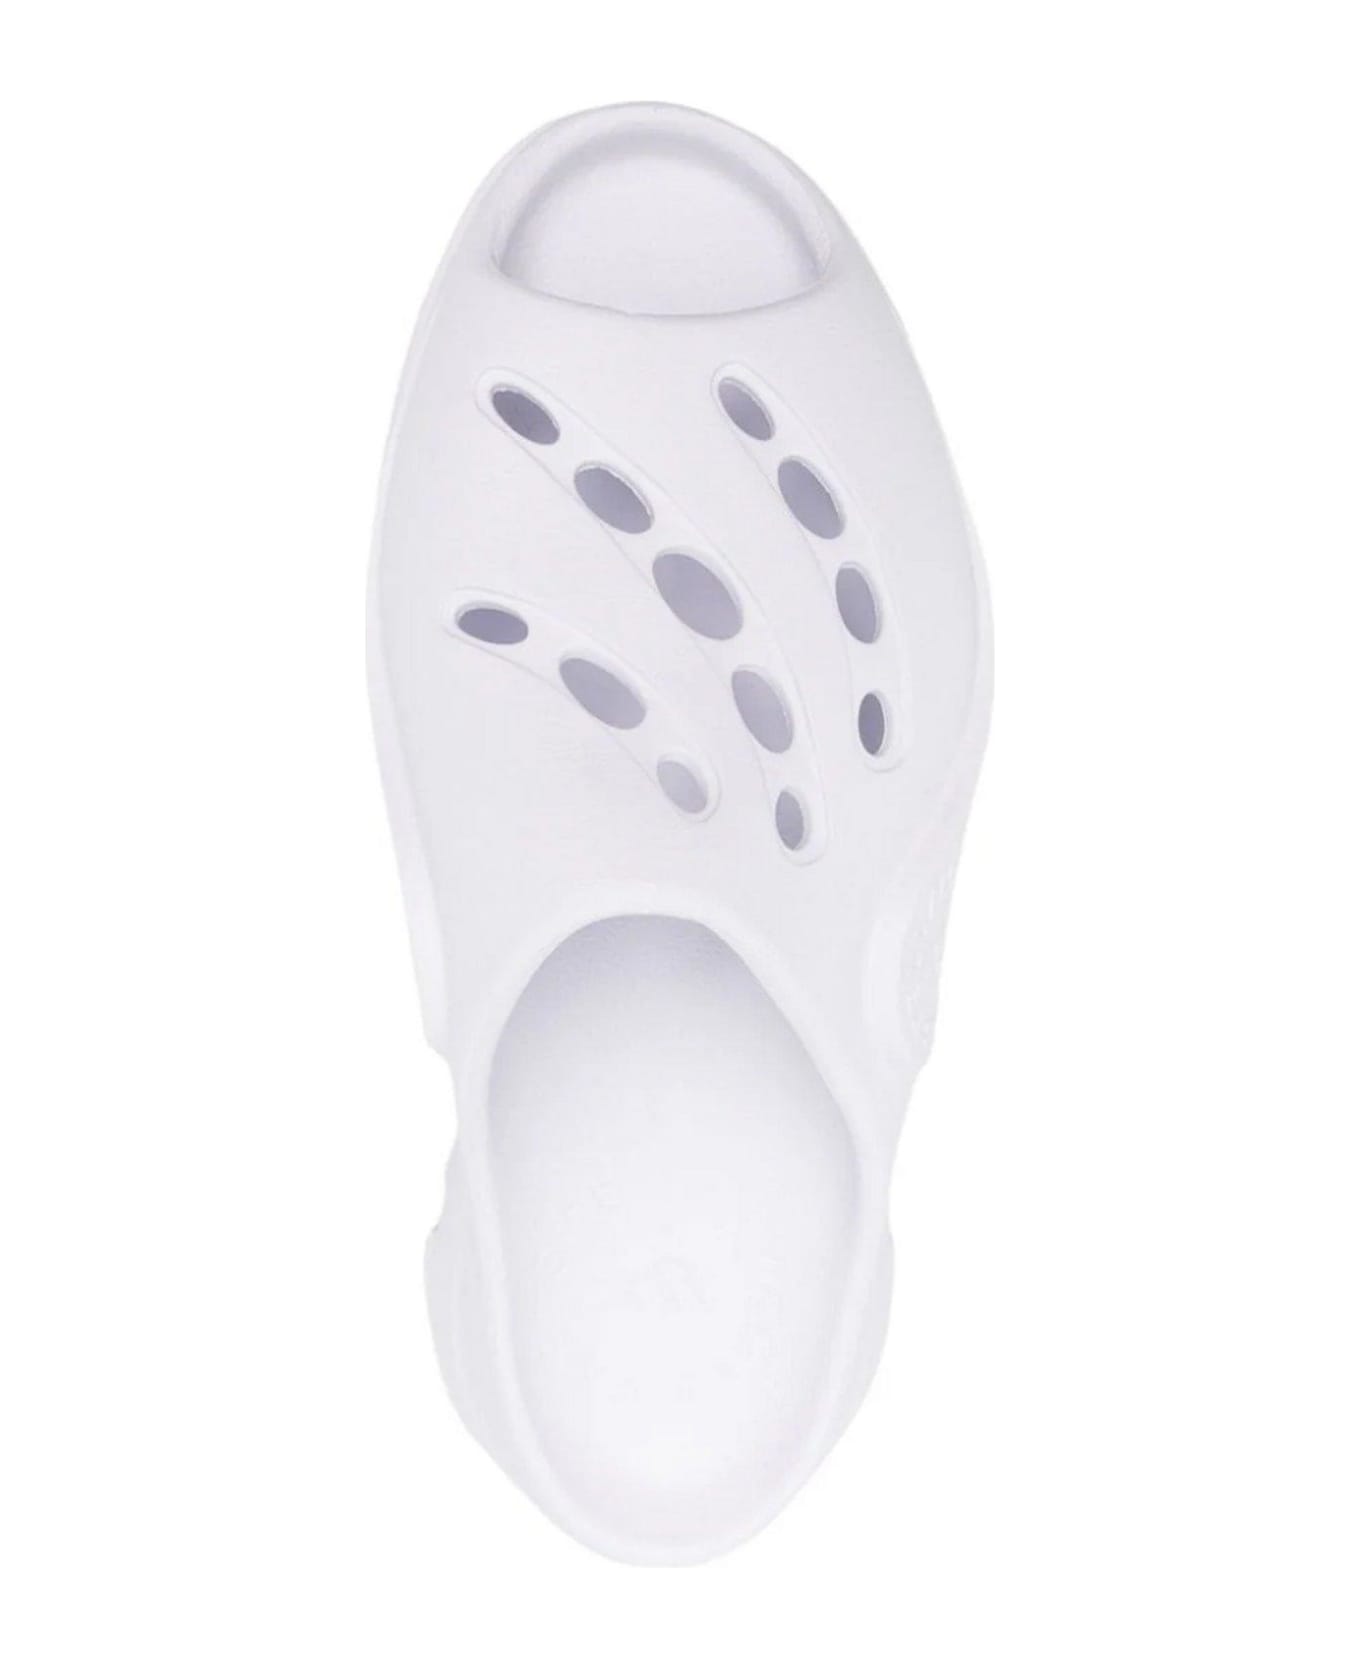 Adidas by Stella McCartney Cut-out Detailed Slip-on Clogs - WHITE サンダル